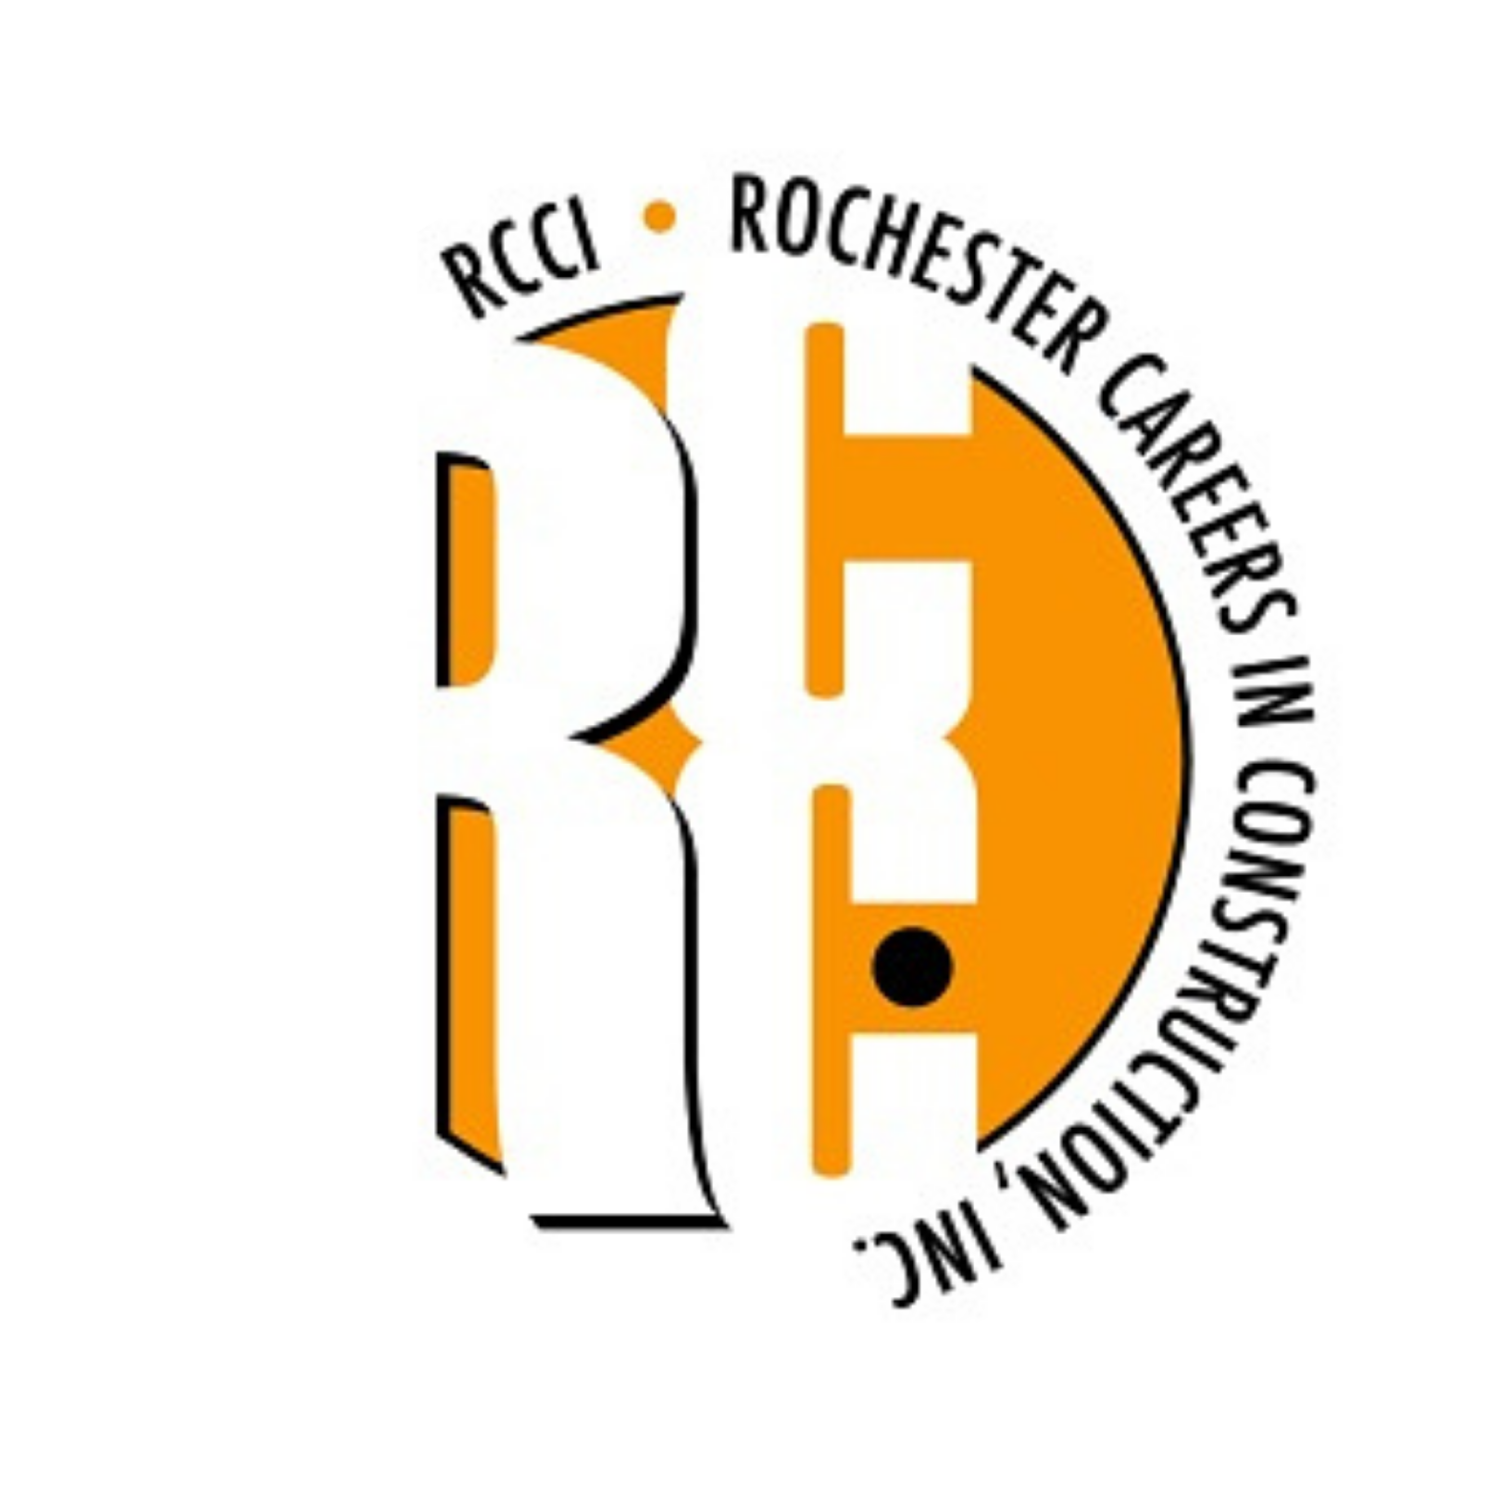 Rochester Careers in Construction, Inc. (RCCI)